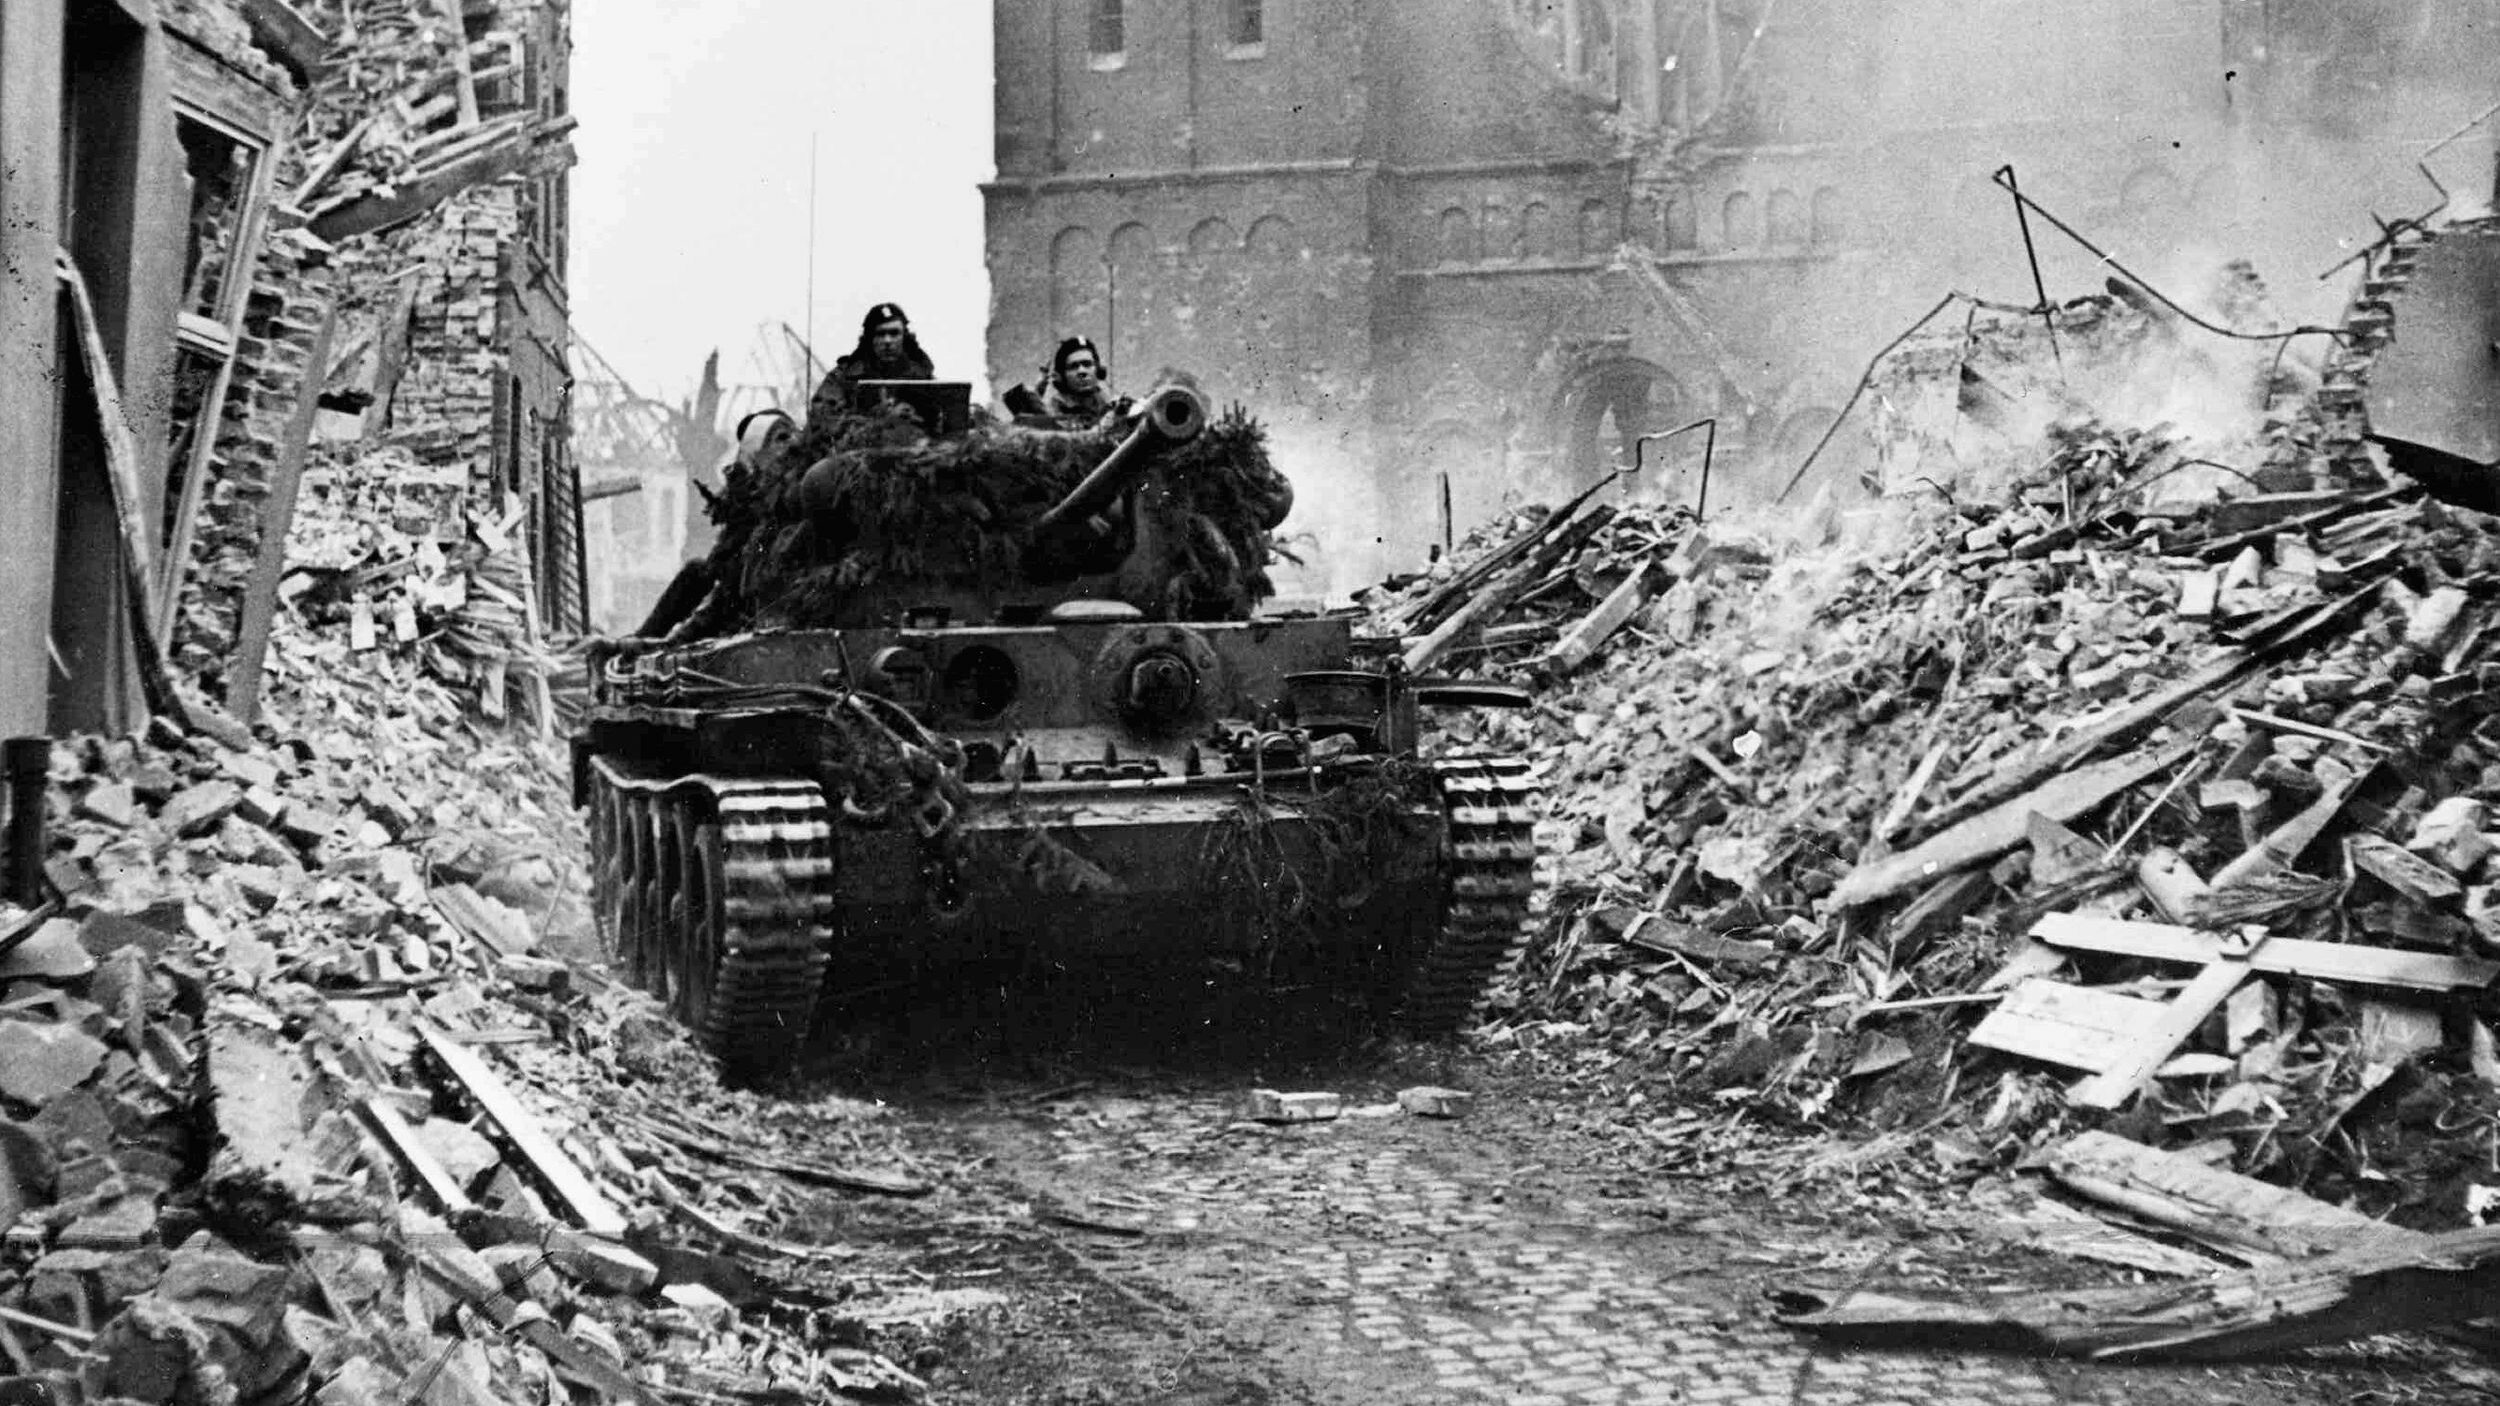 Troops and armor of the Canadian First Army cautiously enter the French town of Calear on February 28, 1945. The Germans had previously evacuated the area, but they later stood and fought the Canadians viciously. (National Archives)